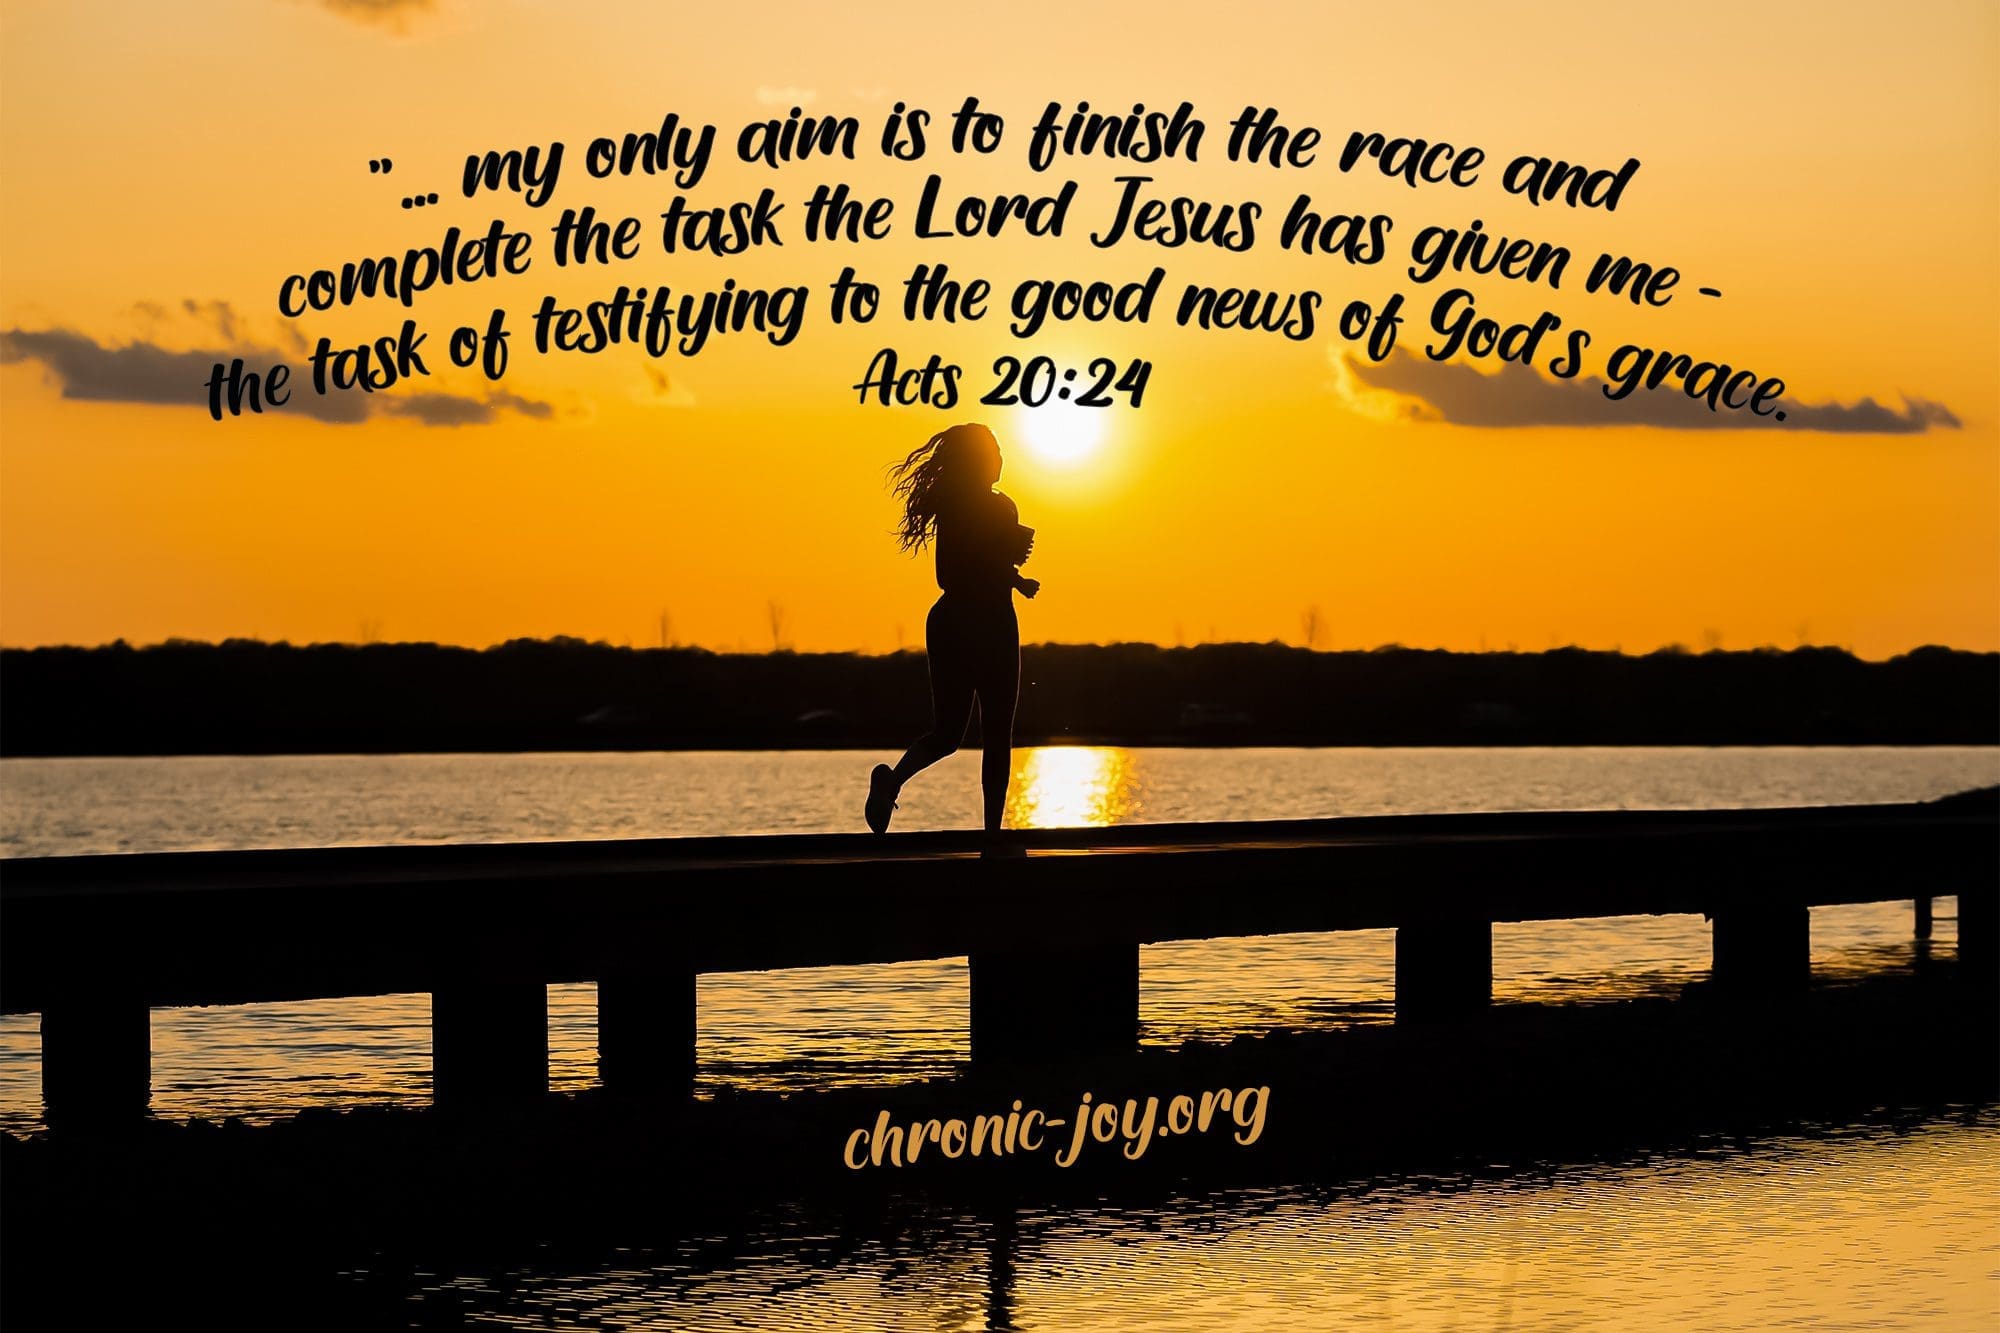 "...my only aim is to finish the race and complete the task the Lord Jesus has given me -- the task of testifying to the good news of God's grace." Acts 20:24